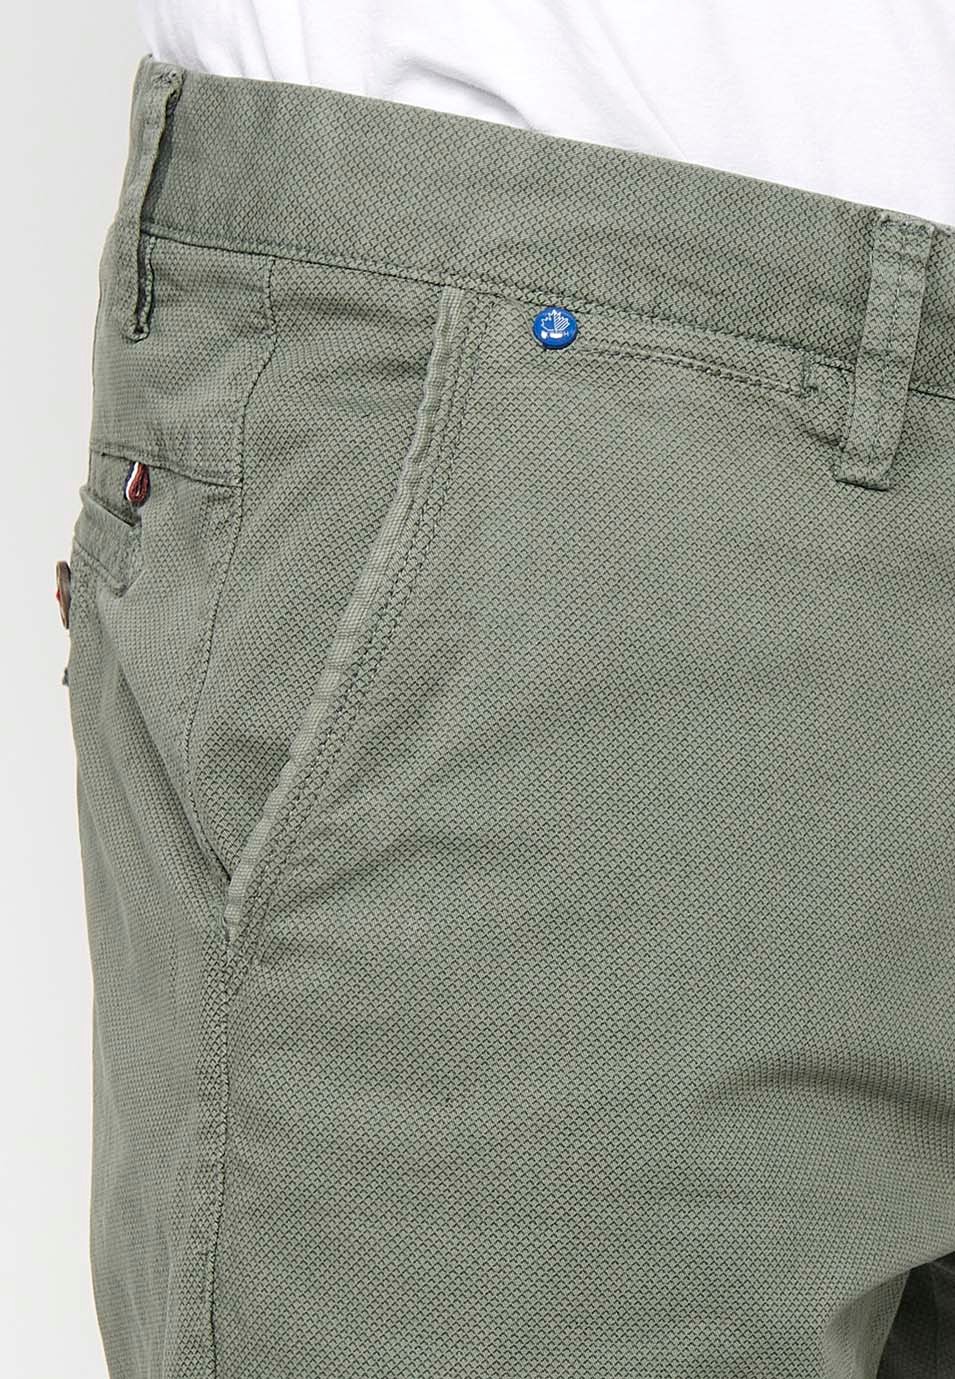 Bermuda Chino Shorts with Turn-Up Finish with Front Zipper and Button Closure with Four Pockets in Green Color for Men 8